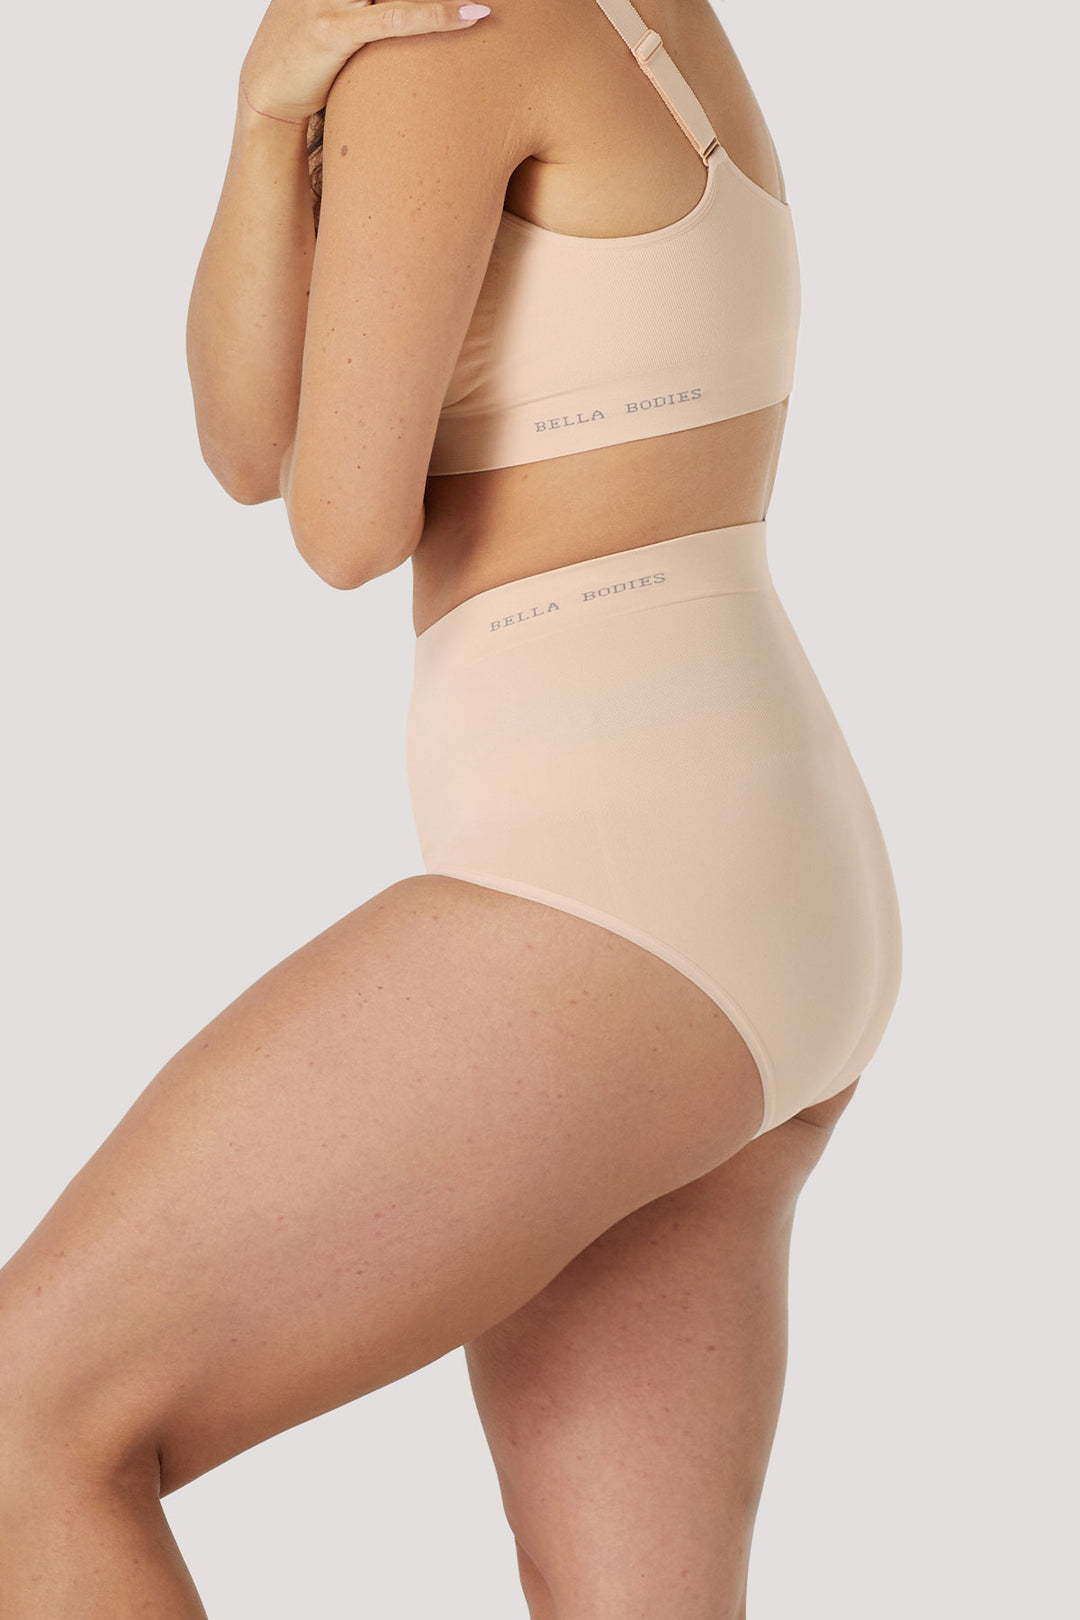 High Waist Smoothing and Firming, Full-Coverage Underwear 2 pack | Bella Bodies UK | Soft Peach | Side